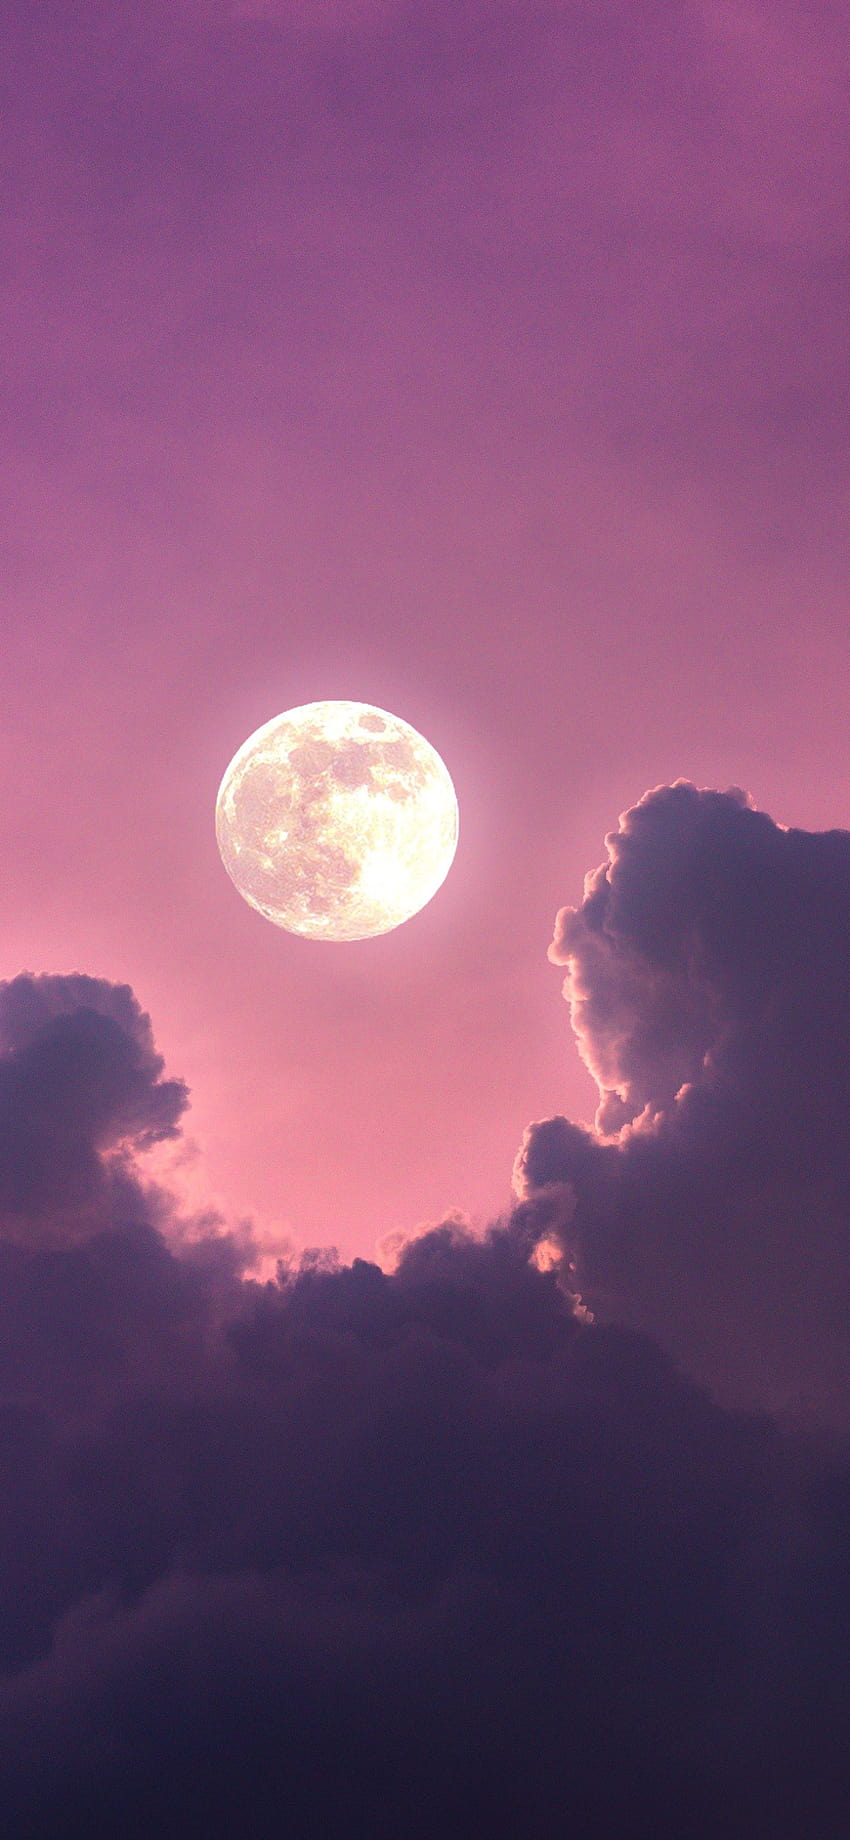 Full moon , Clouds, Pink sky, Scenic, Aesthetic, Nature, moon iphone aesthetic HD phone wallpaper